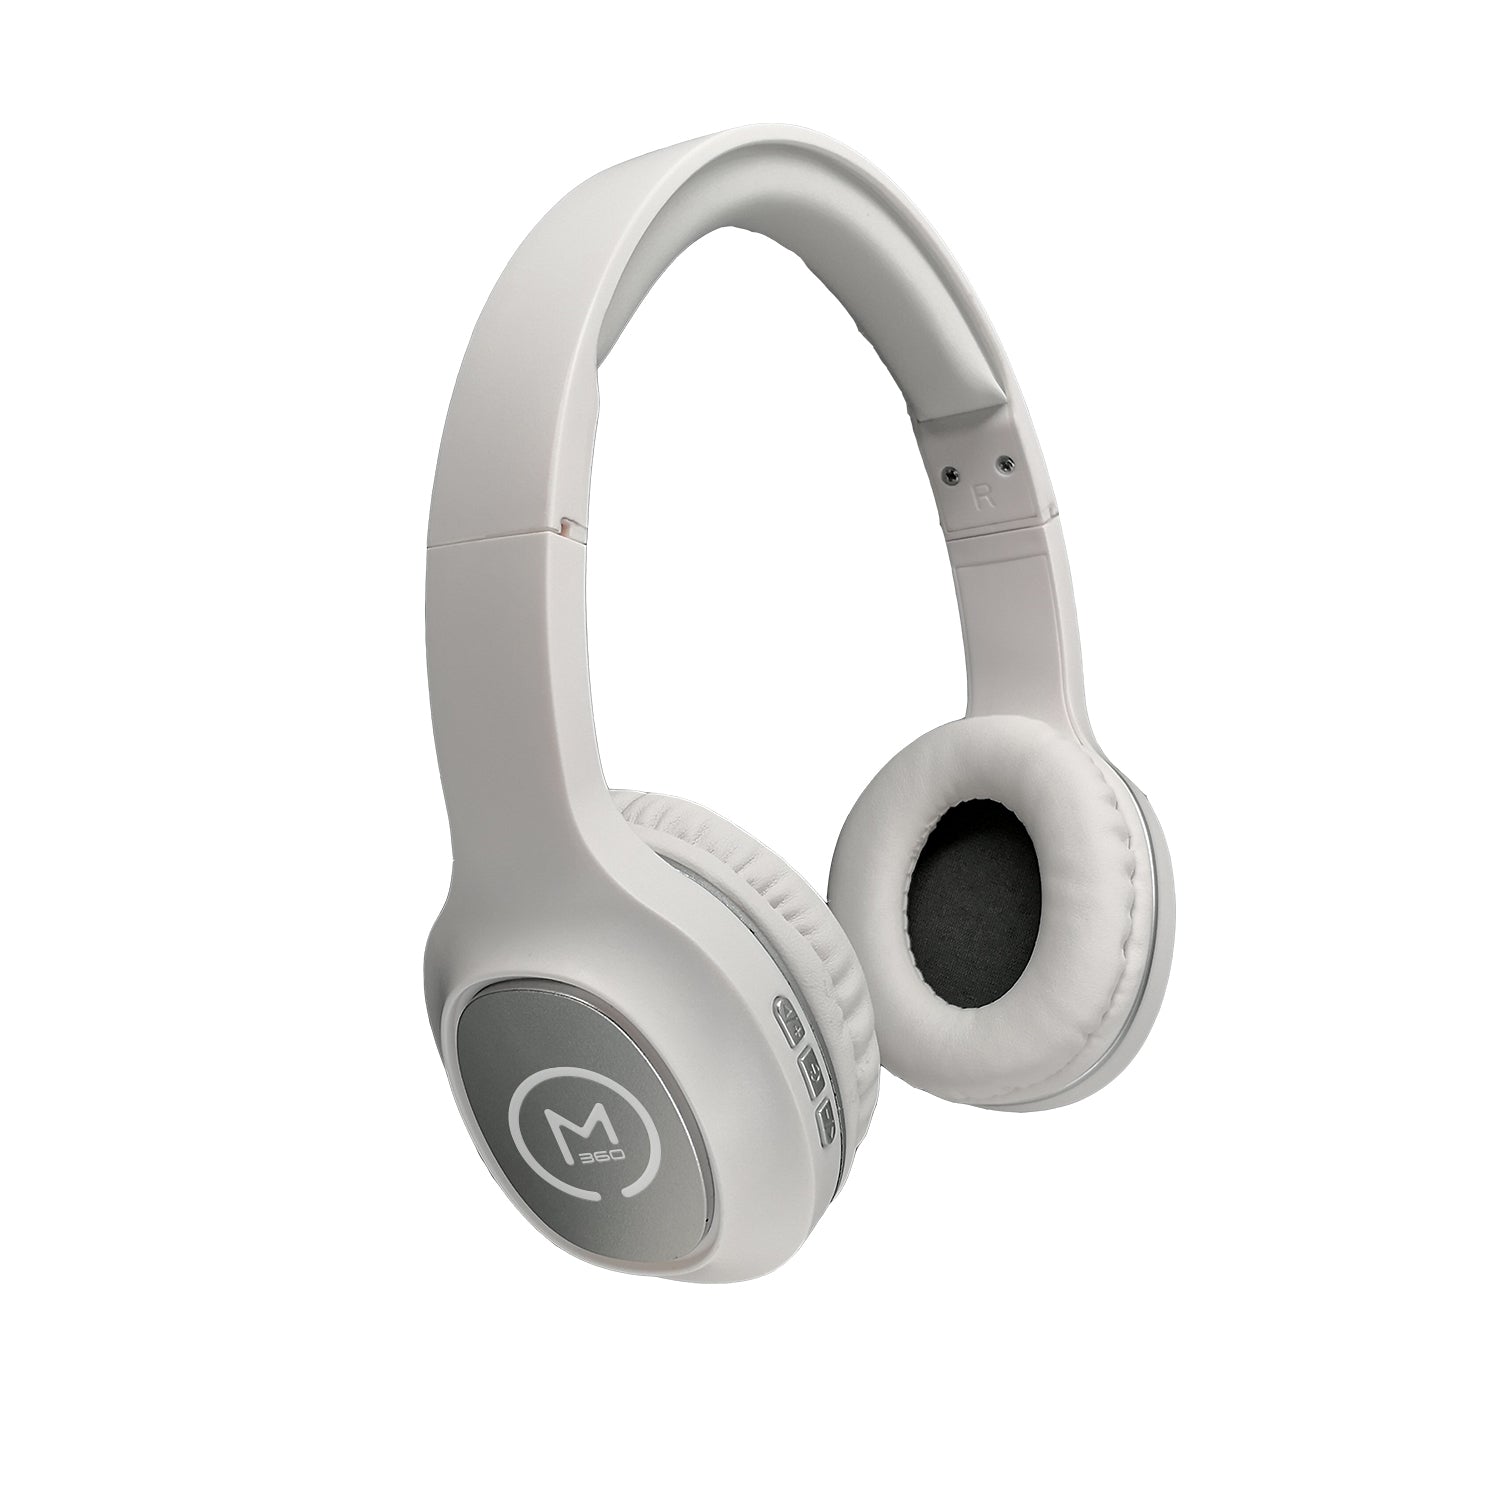 Photo of Morpheus 360 Tremors Wireless on-ear Headphones – White with Silver accents, show the padded headband and plush earpads.